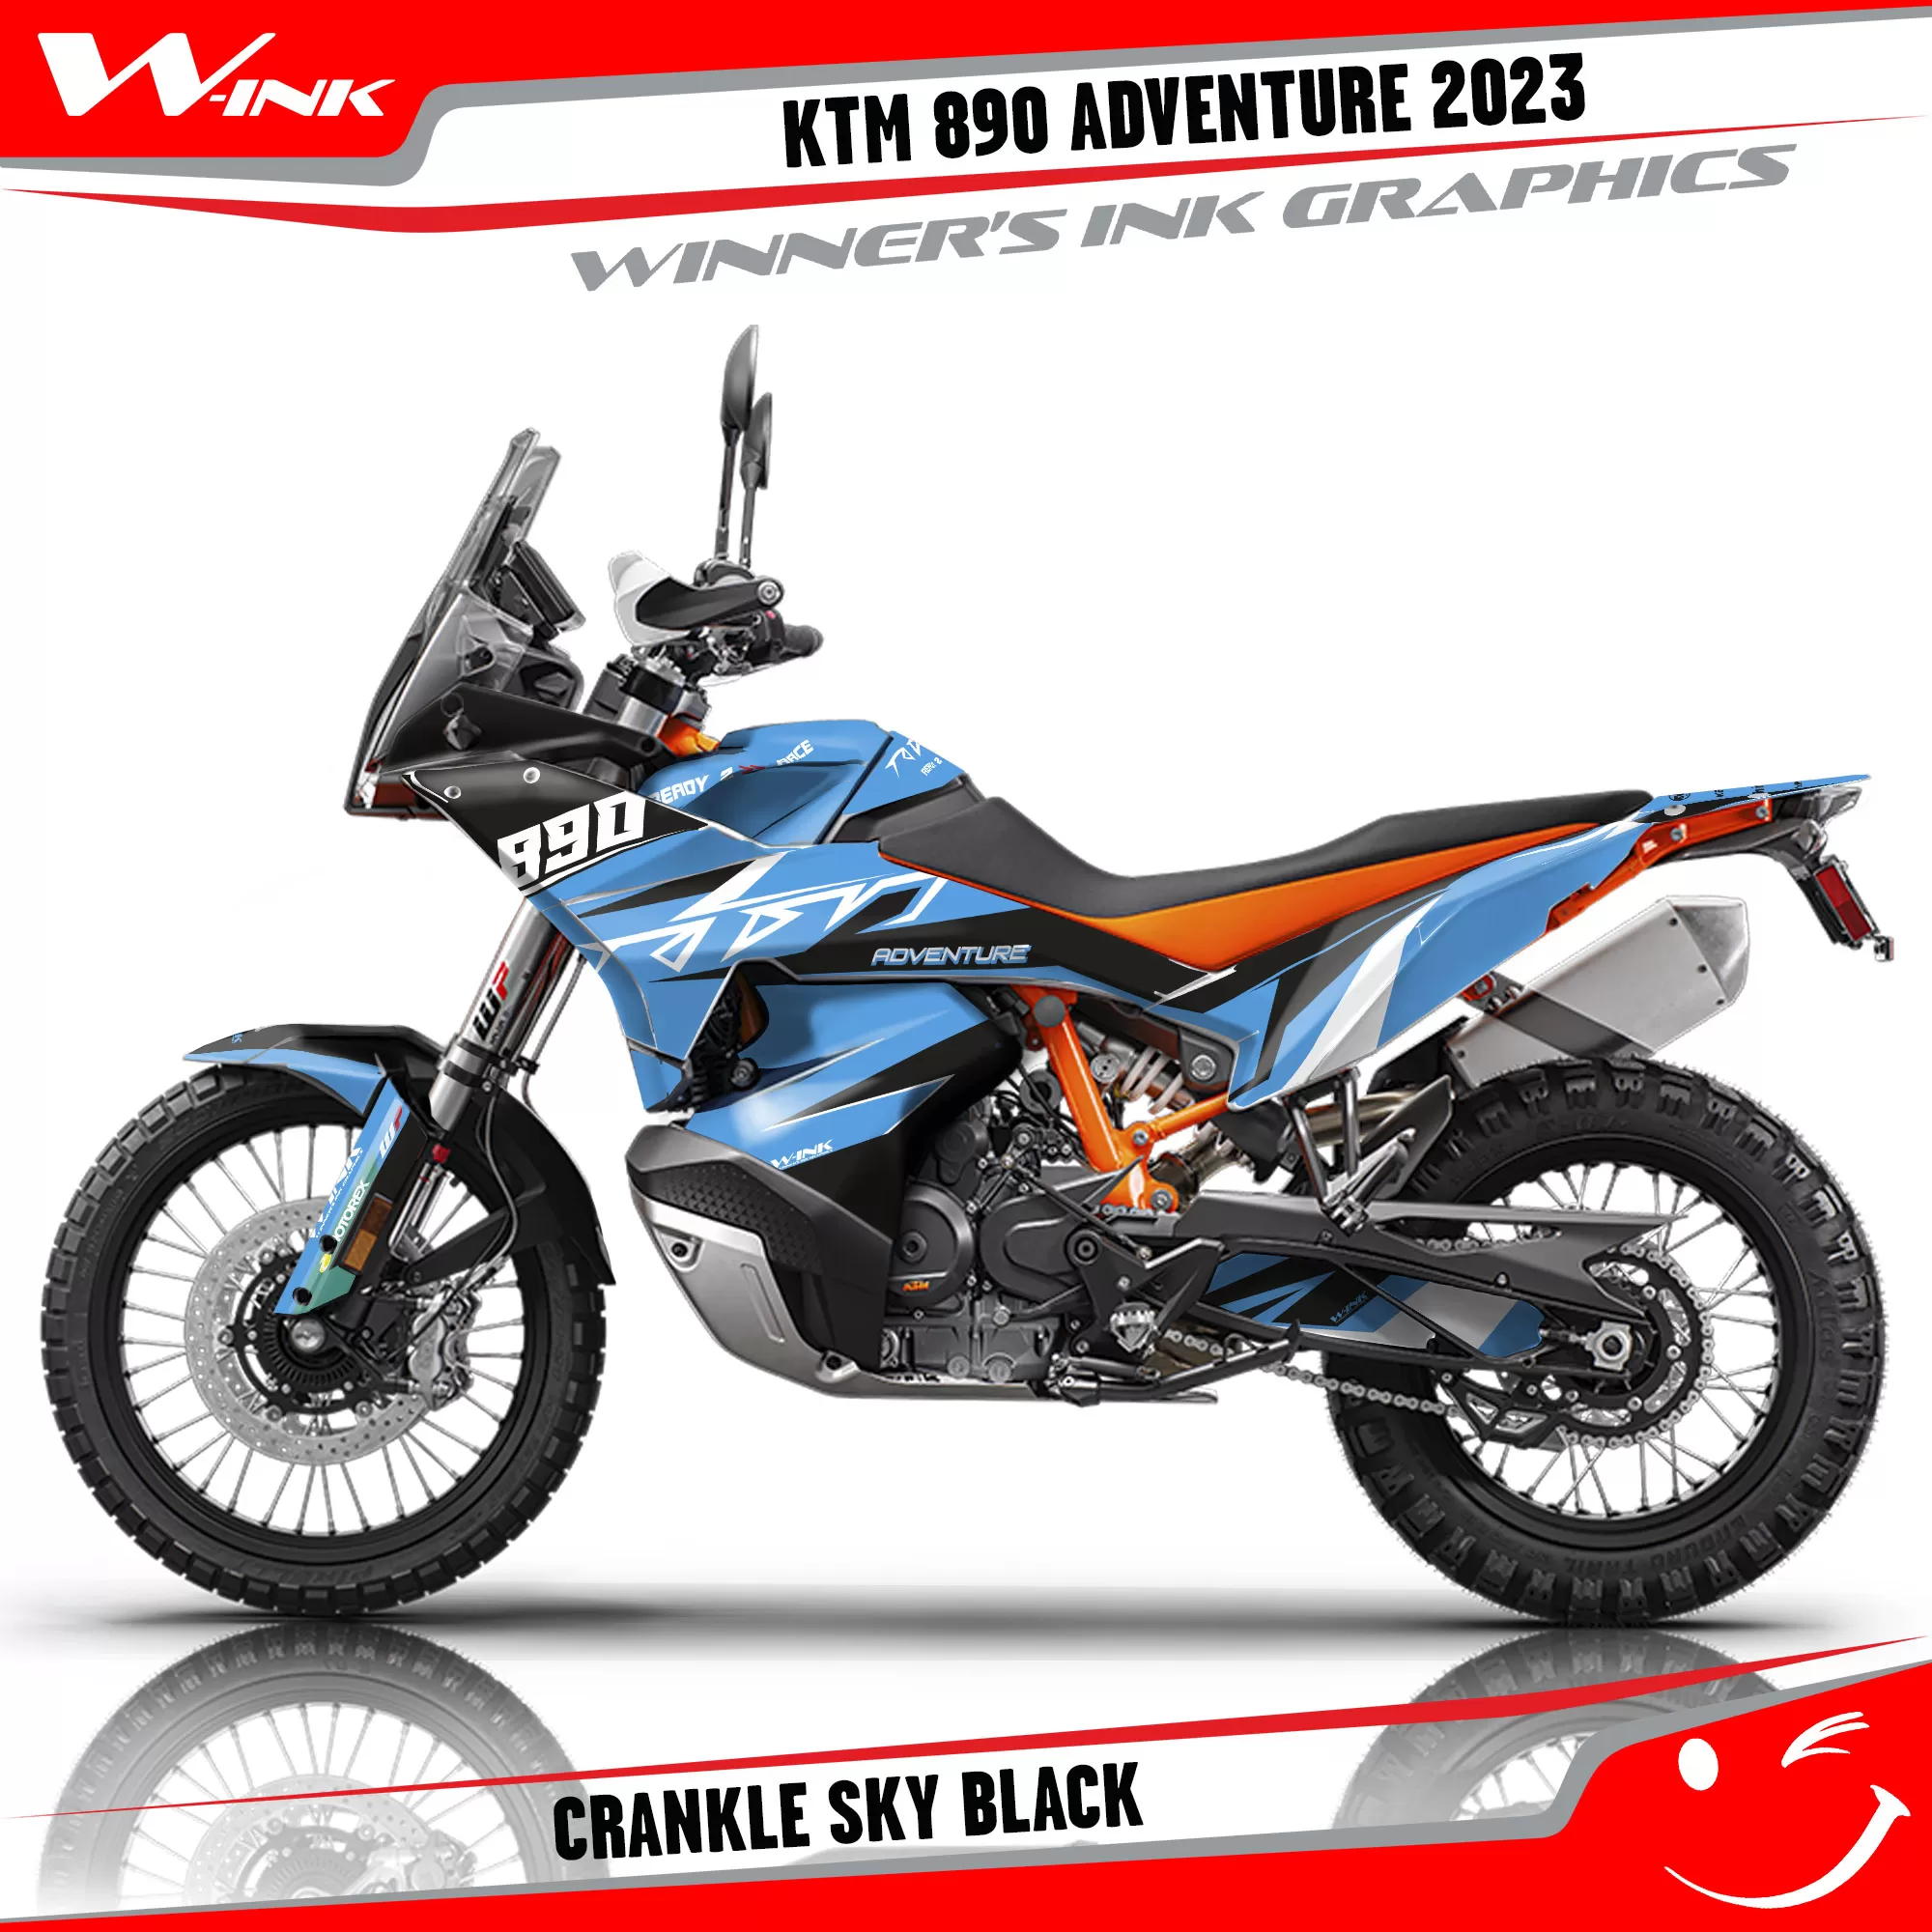 Adventure-890-2023-graphics-kit-and-decals-with-design-Crankle-Sky-Black